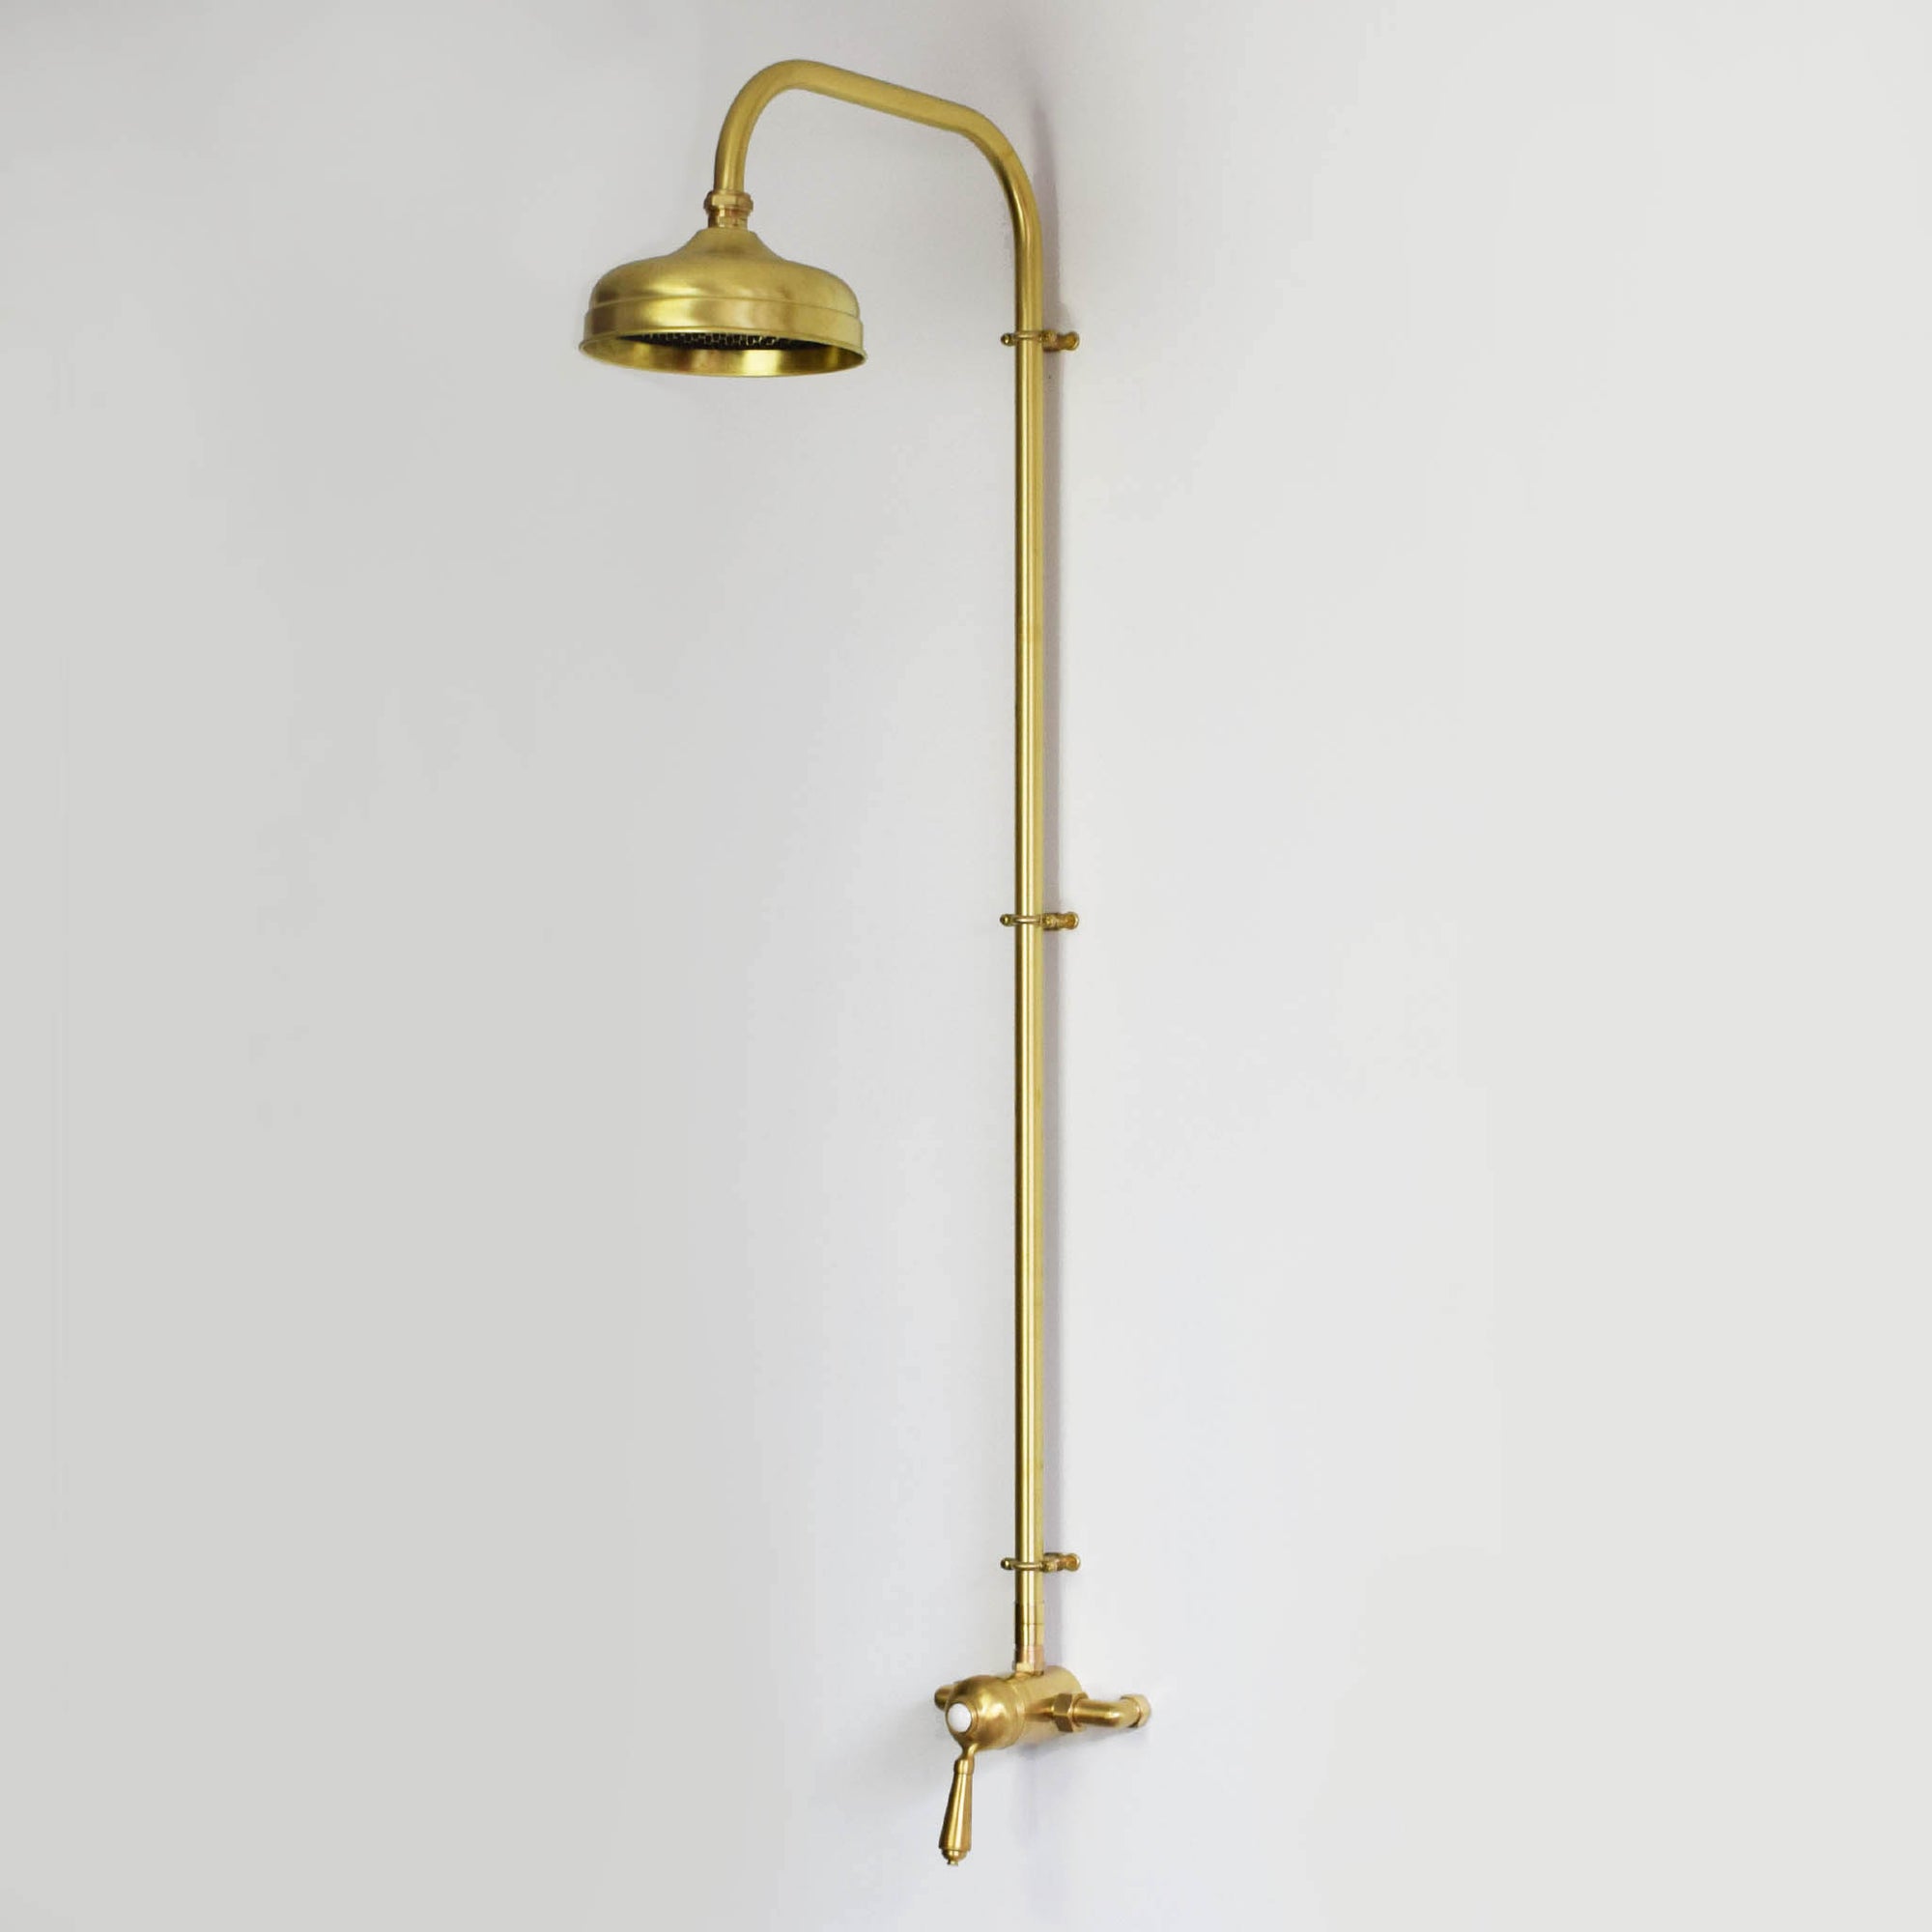 brass thermostatic shower for use as an indoor shower or outdoor garden shower